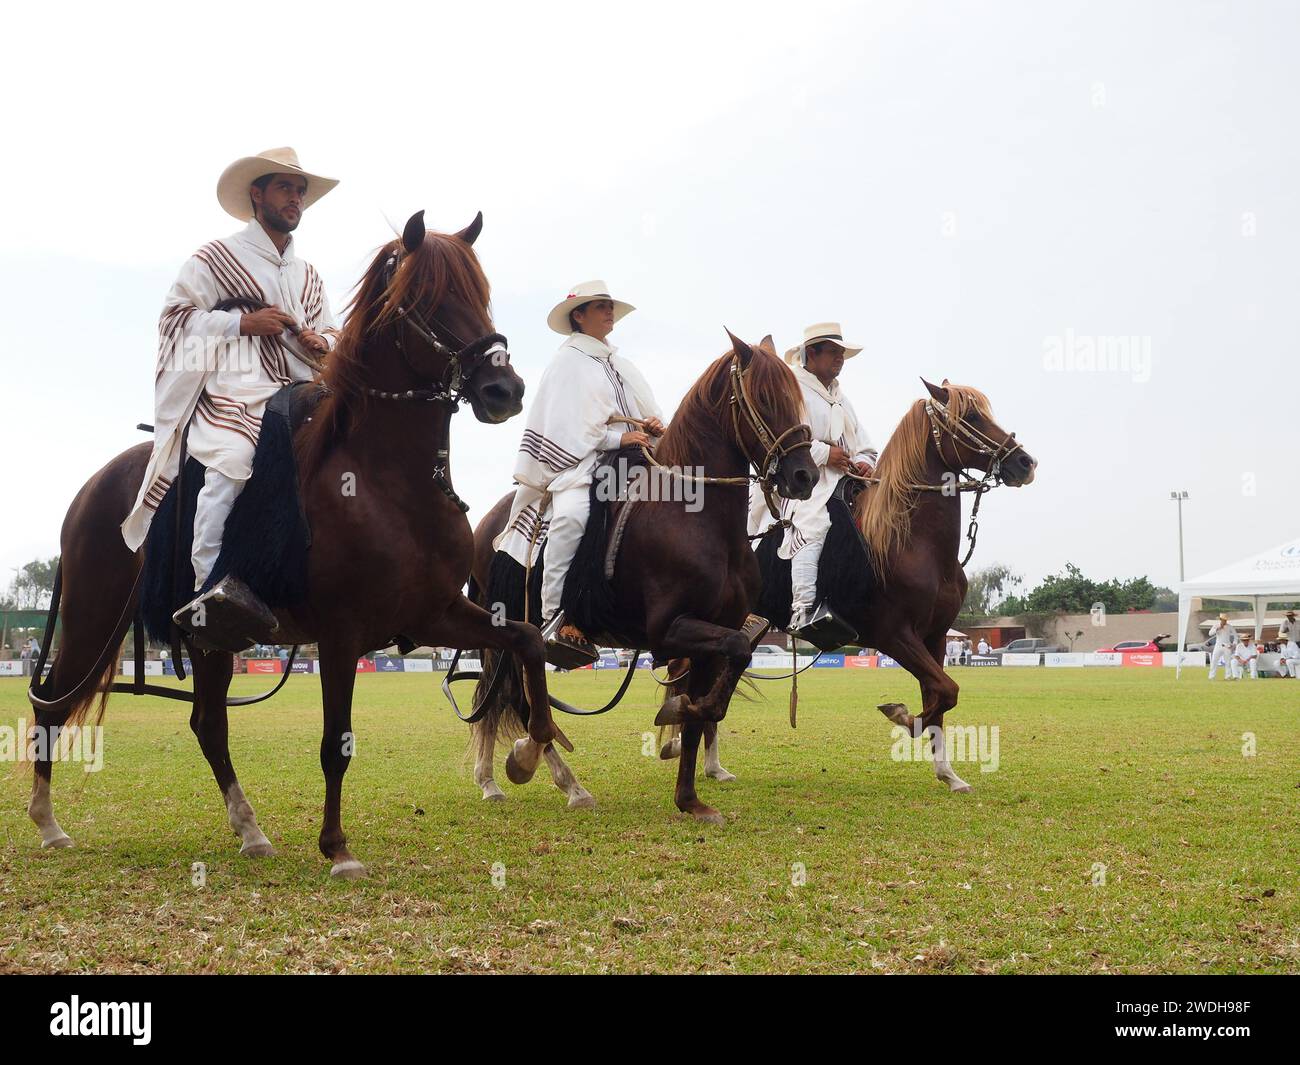 Peruvian horse and rider, known as Chalan, showing his gait at the XXI Regional Competition of the Peruvian Paso Horse of San Pedro de Mala. The Peruvian Paso Horse is a breed of light saddle horse known for its smooth ride distinguished by a natural, four-beat, lateral gait and was declared a Cultural Heritage of the Nation. Stock Photo